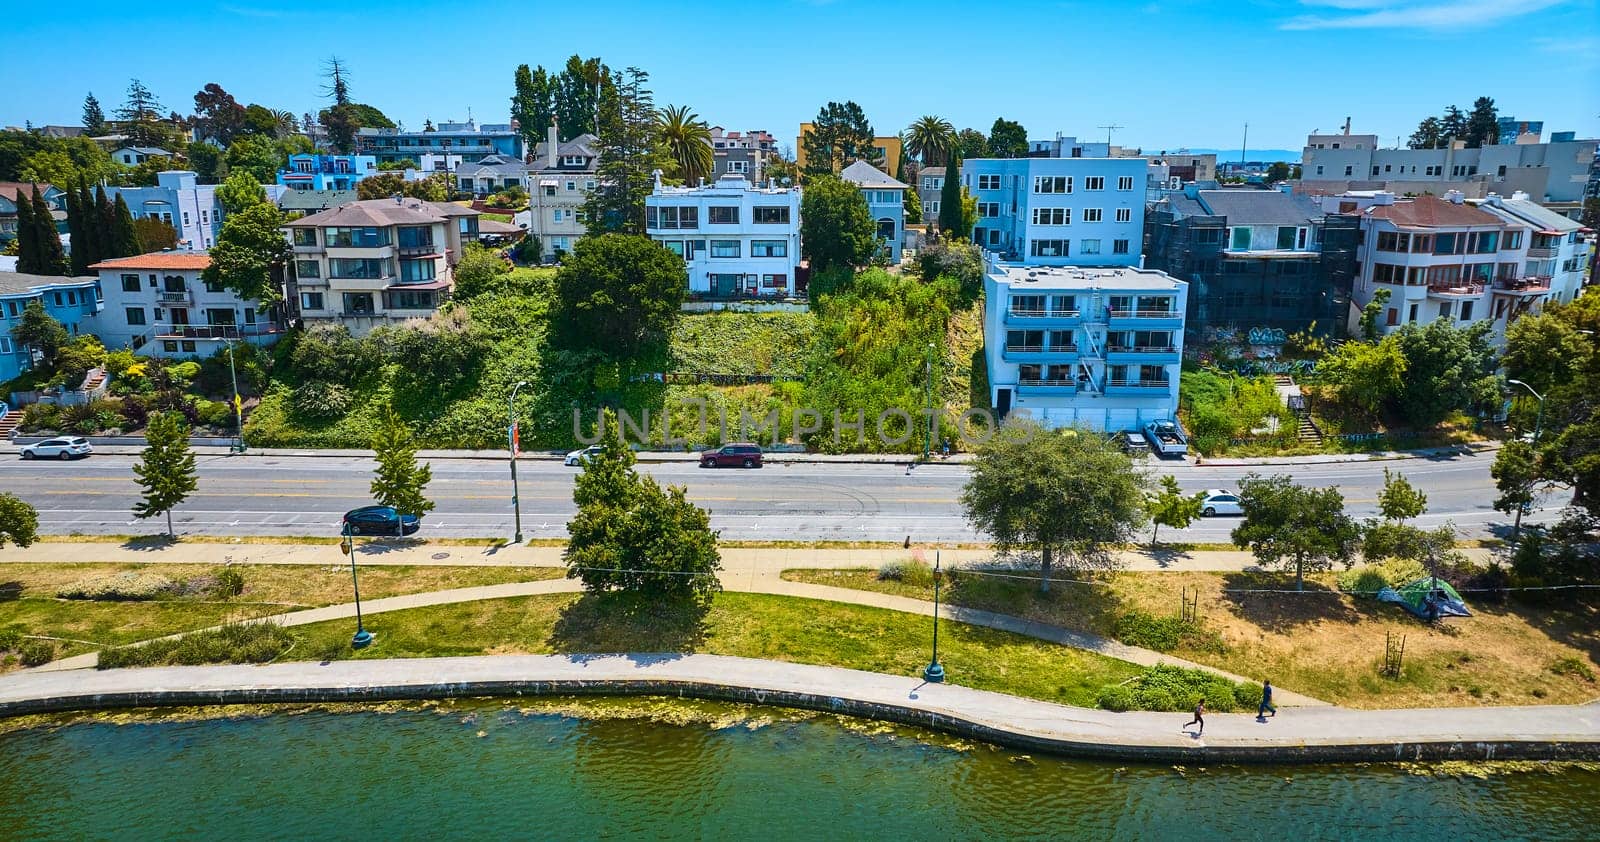 Image of Lake Merritt shoreline with joggers on pathway around lake aerial of apartment buildings